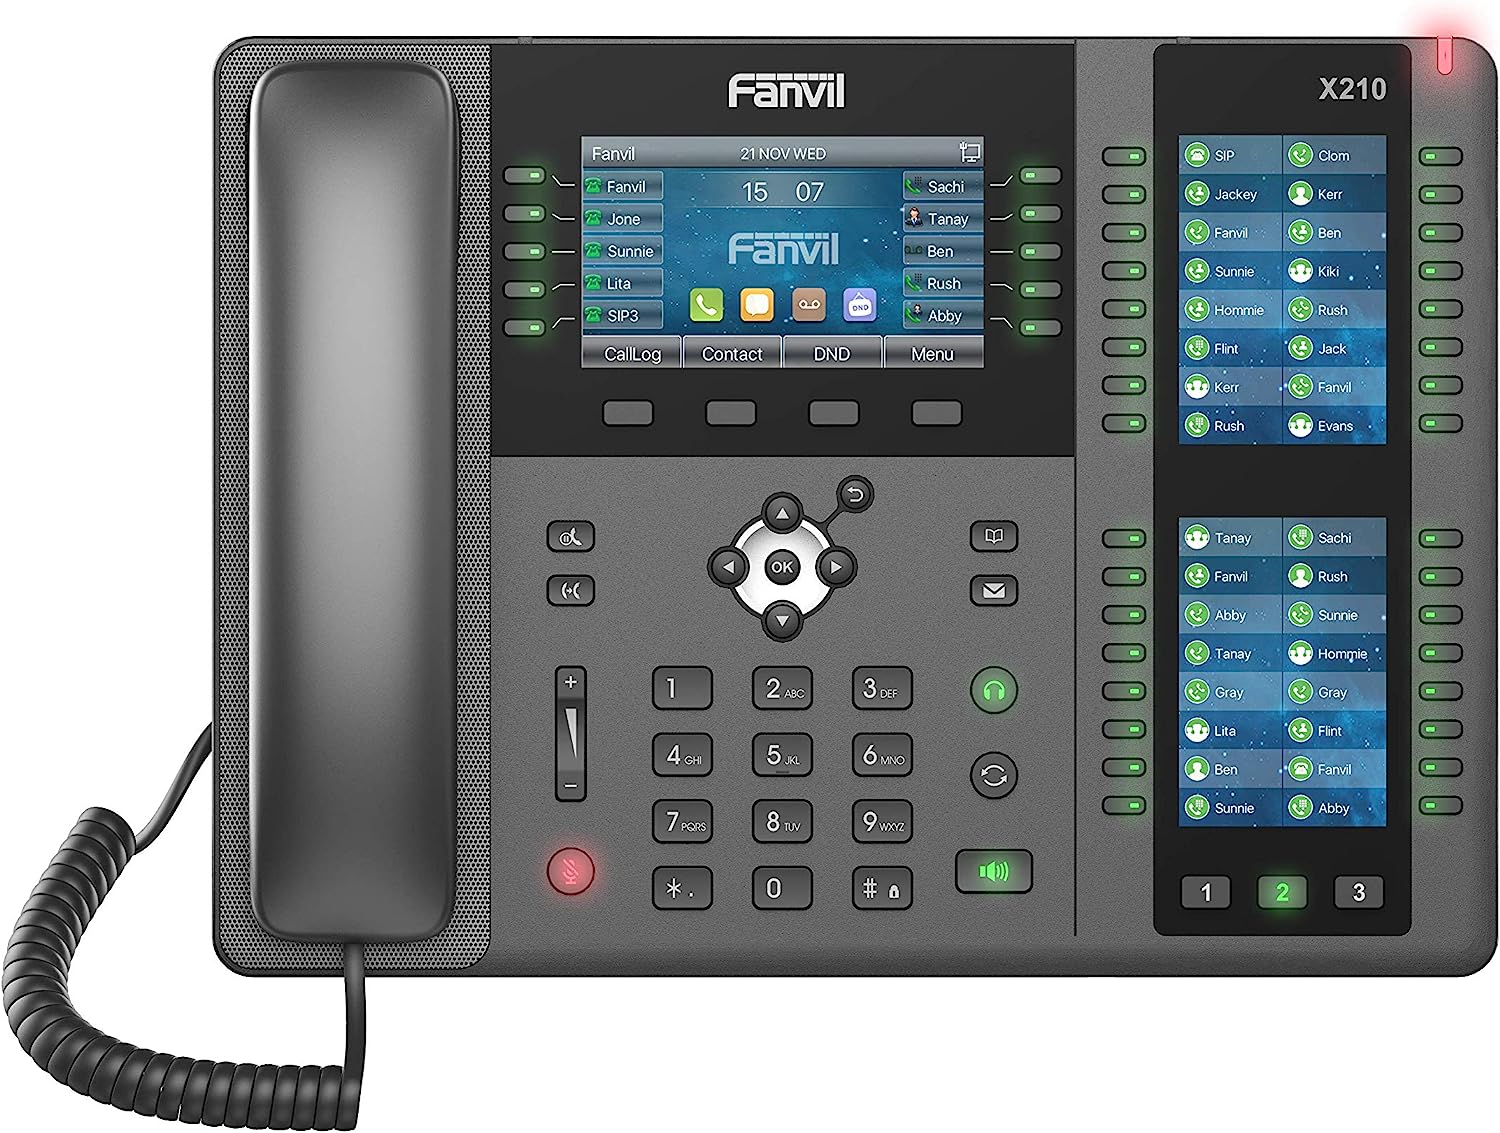 Fanvil X210 Enterprise VoIP Phone, 4.3-Inch Color Display, Two 3.5-Inch Side Color Displays for DSS 